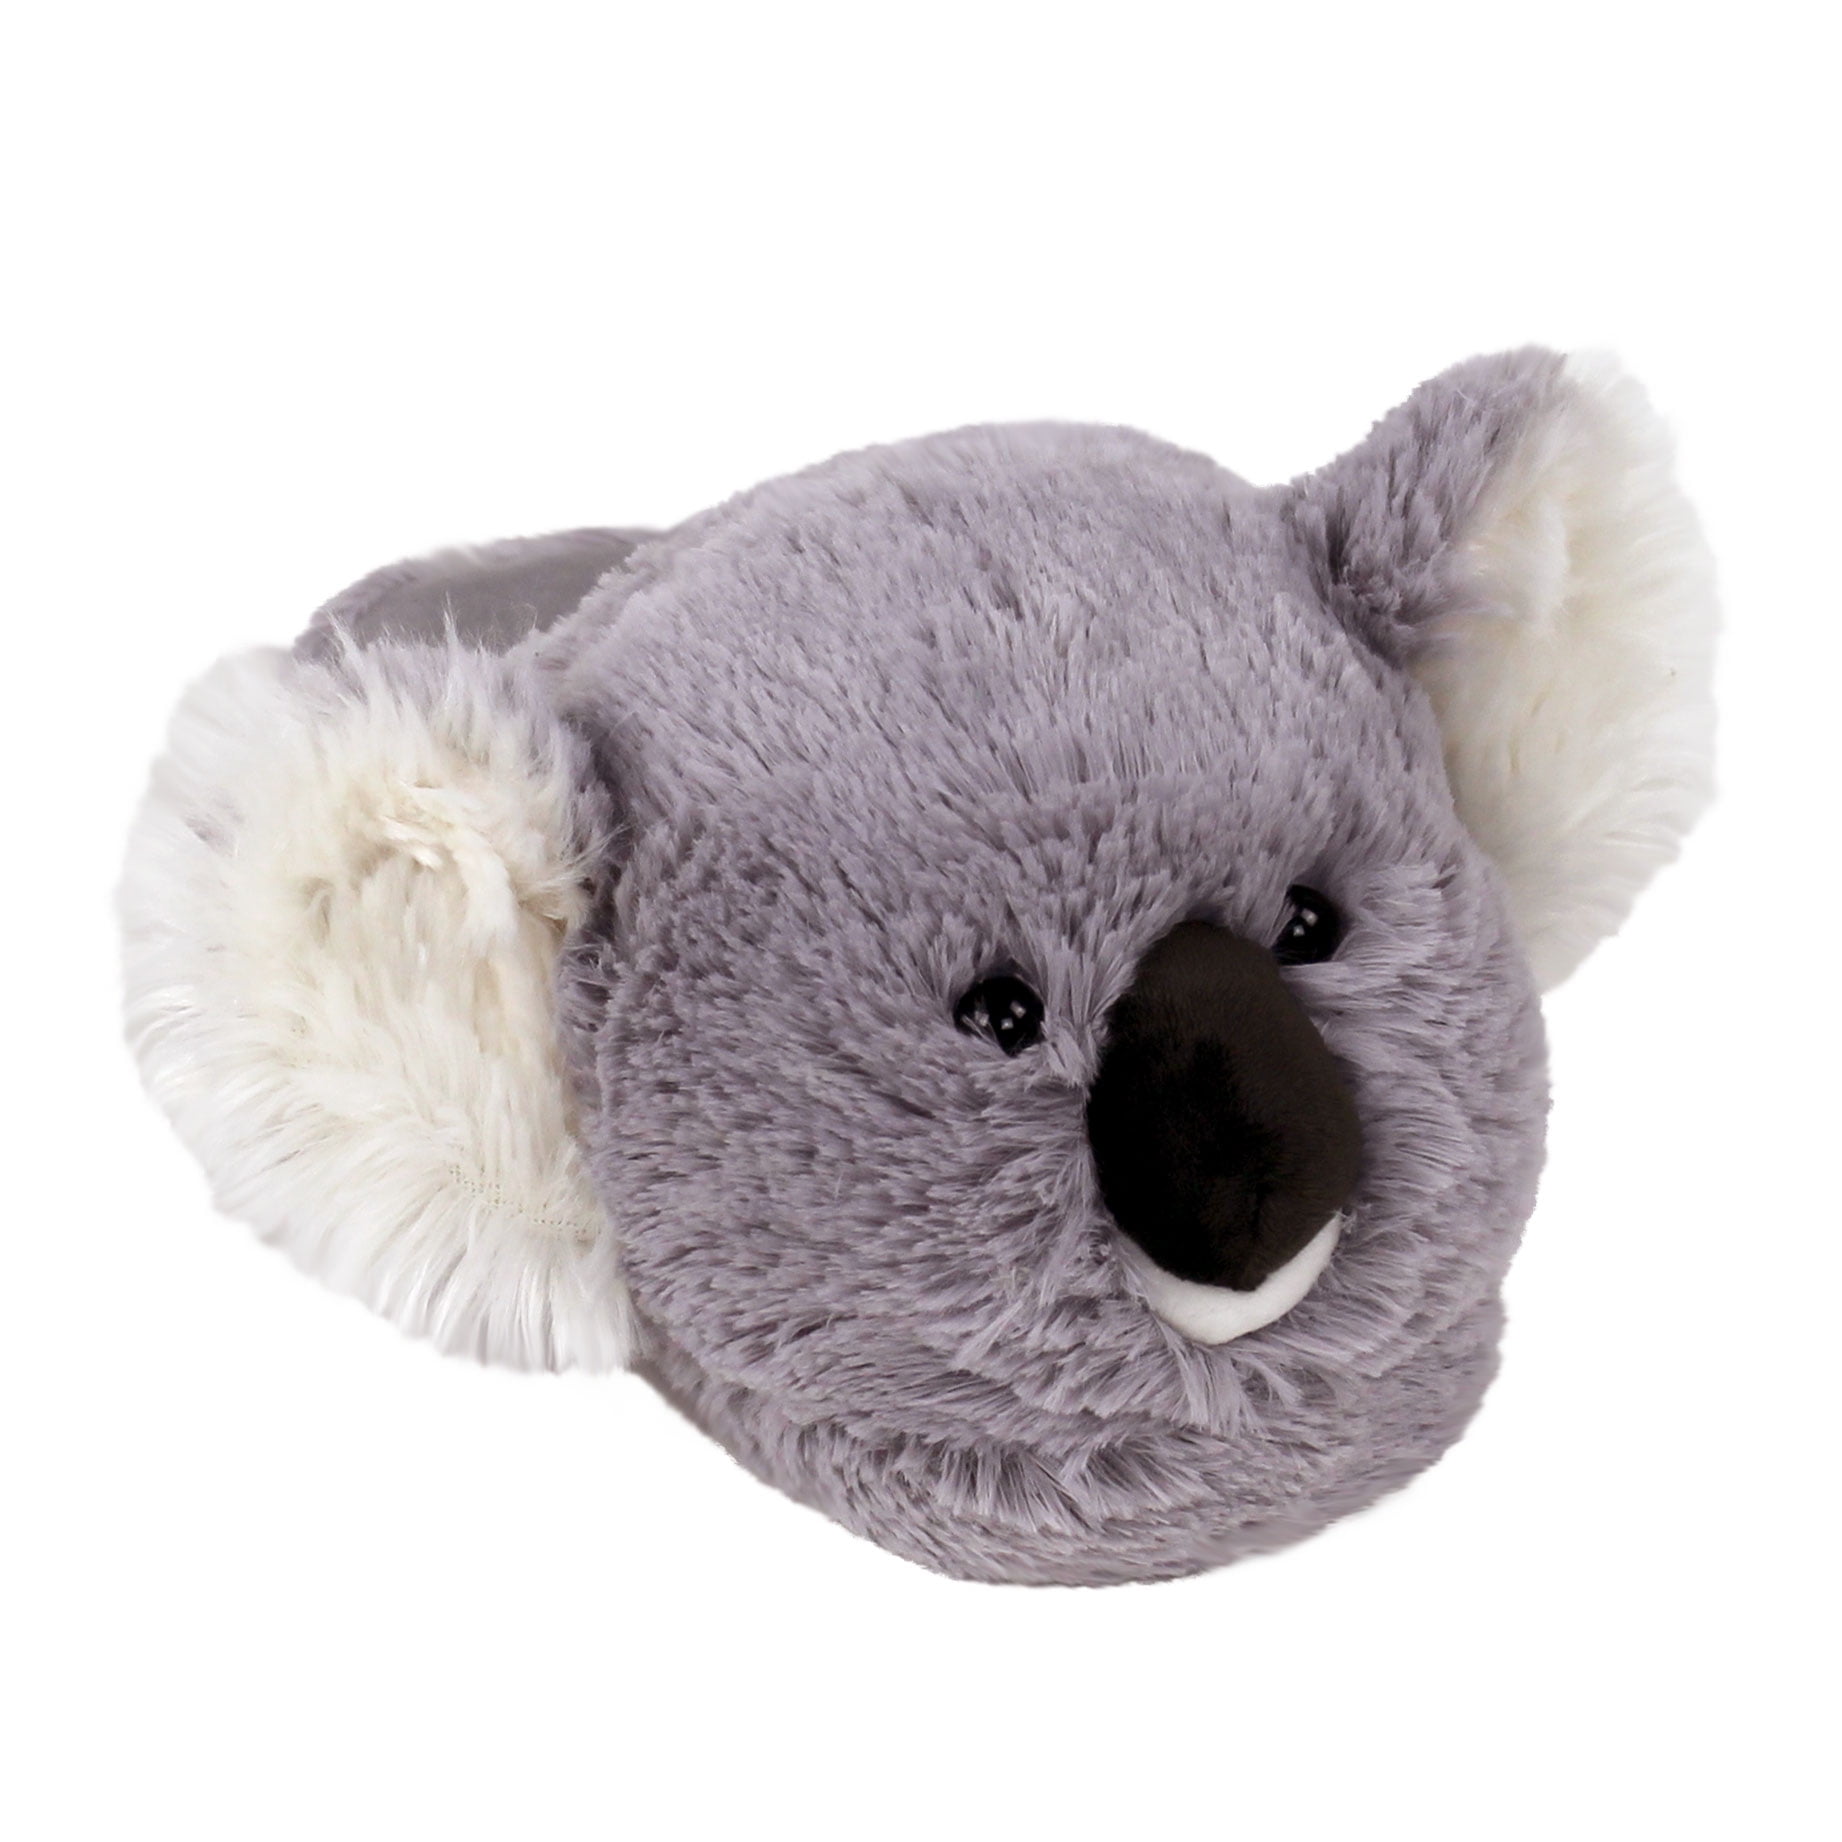 Fuzzy Koala Slippers - Fluffy Gray for Adults Unisex One Size by Everberry  - Walmart.com